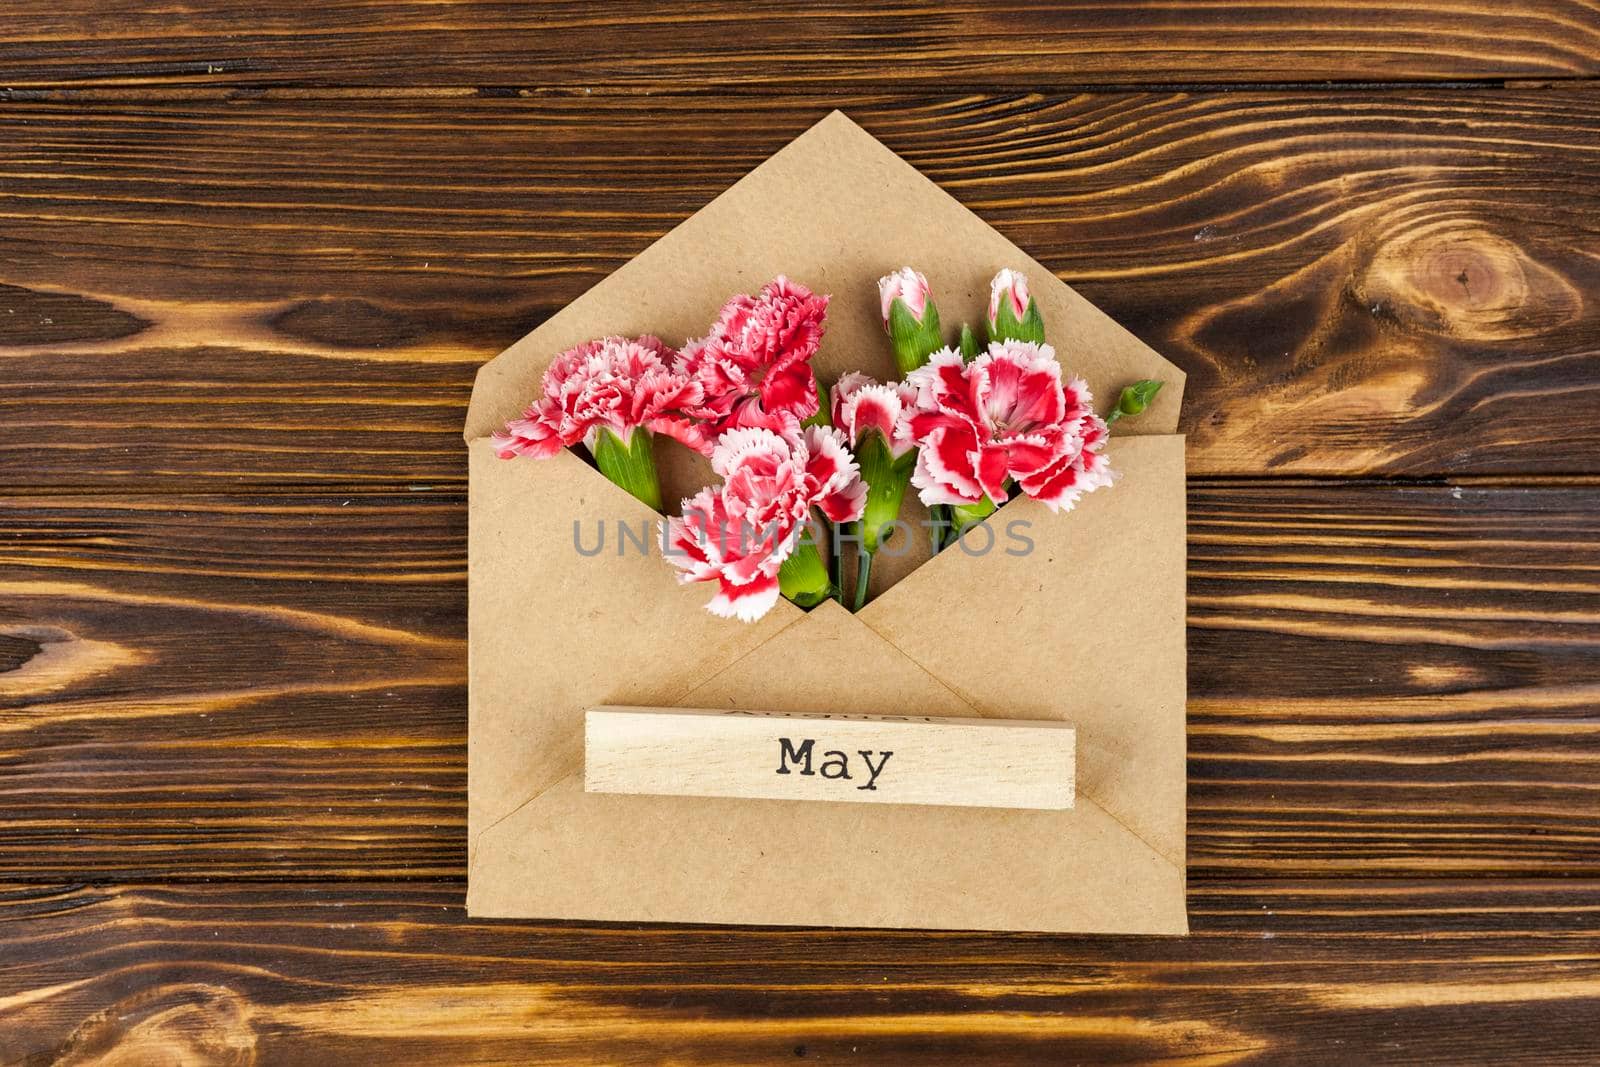 may text wooden block envelope with red carnation flowers